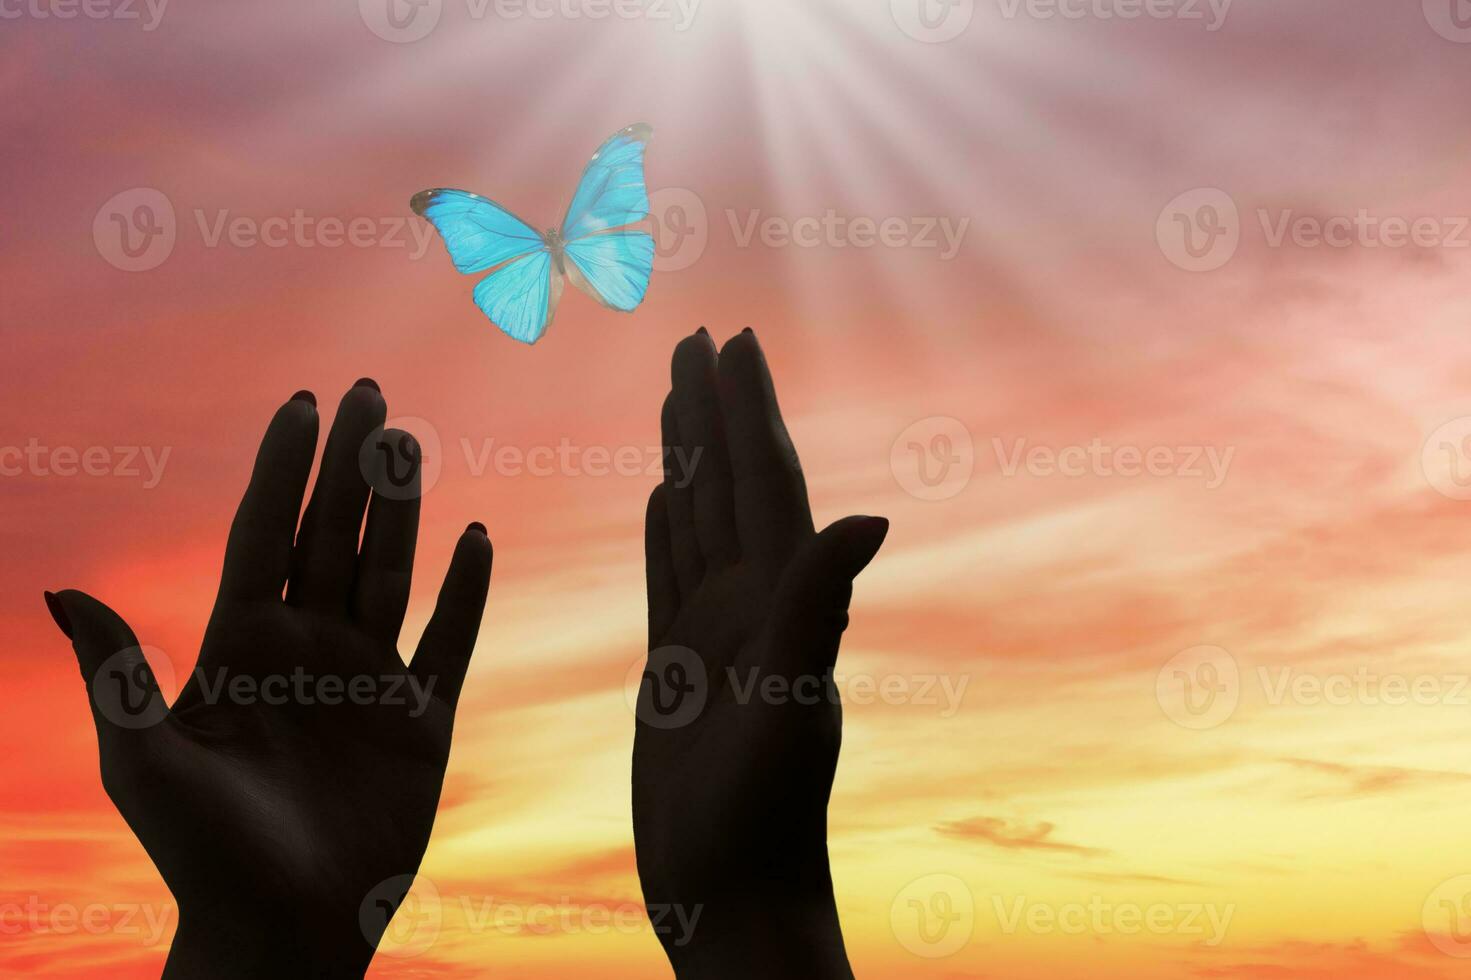 man's hand with a butterfly on the fingers of pulled up against the sky background photo